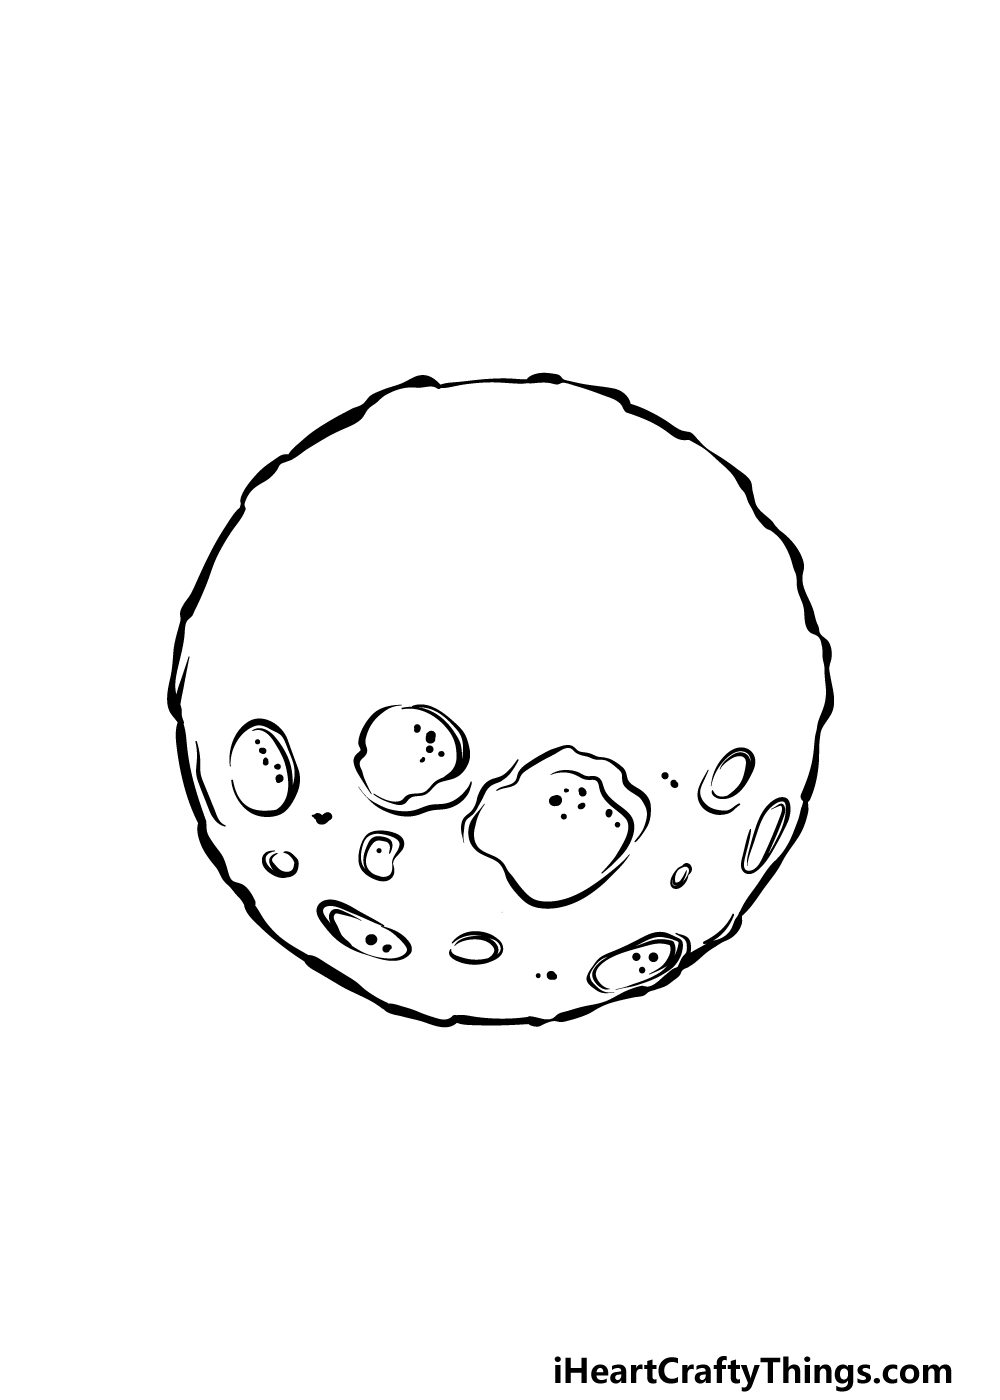 how to draw a full moon step 3